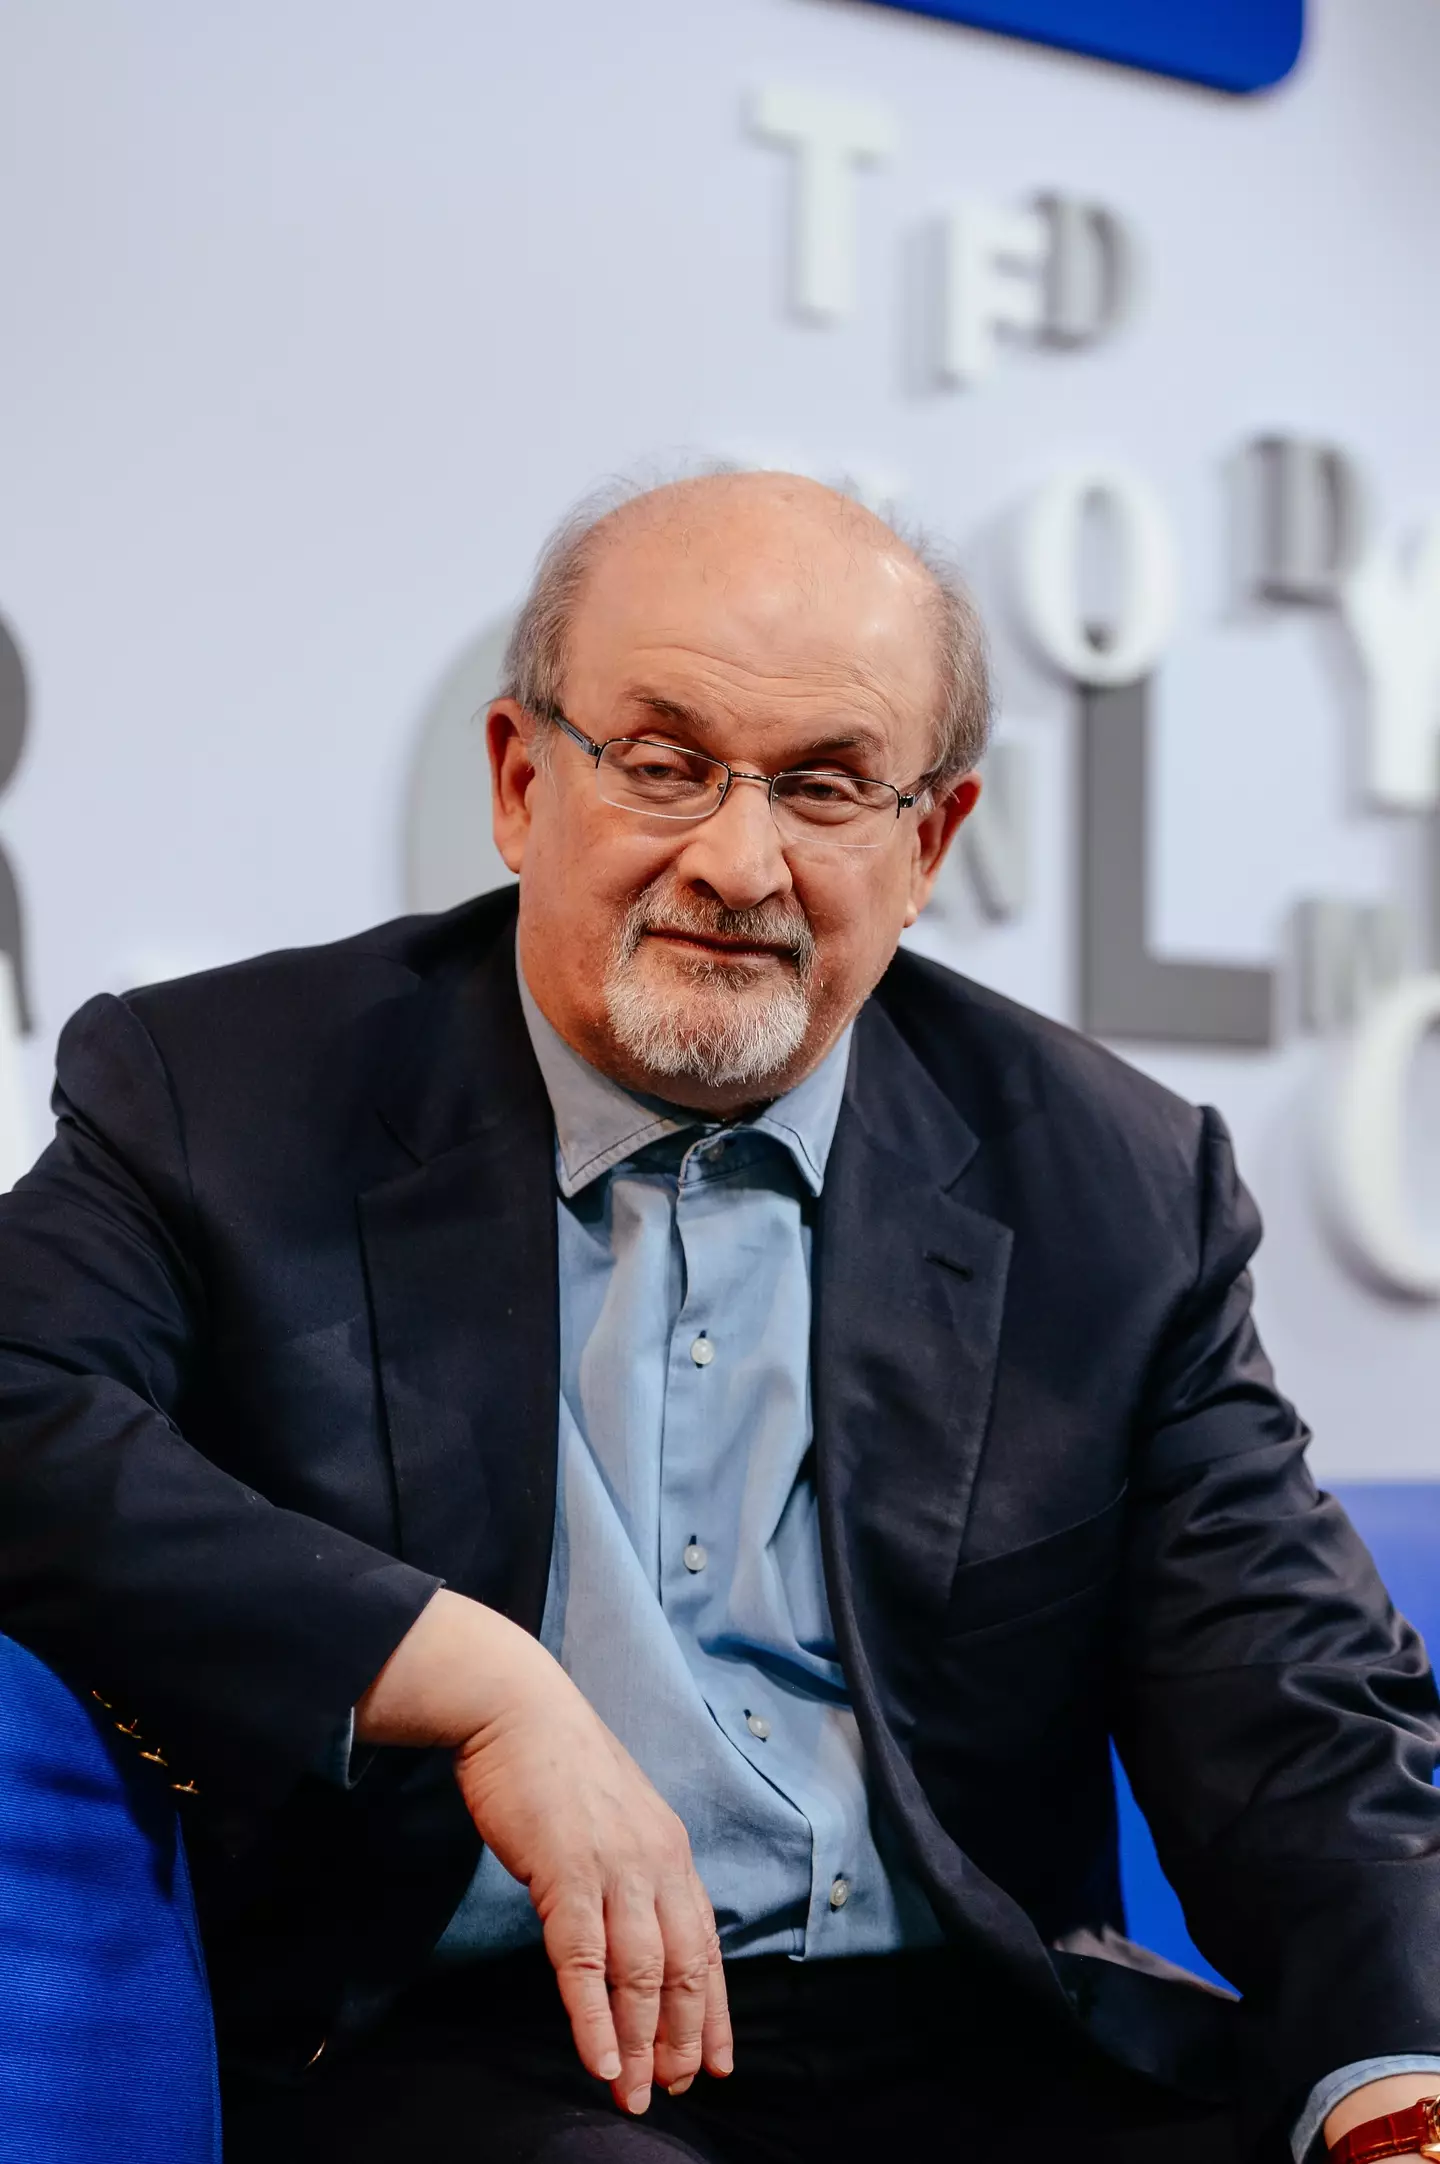 Media in Iran has been celebrating the attack on Rushdie.